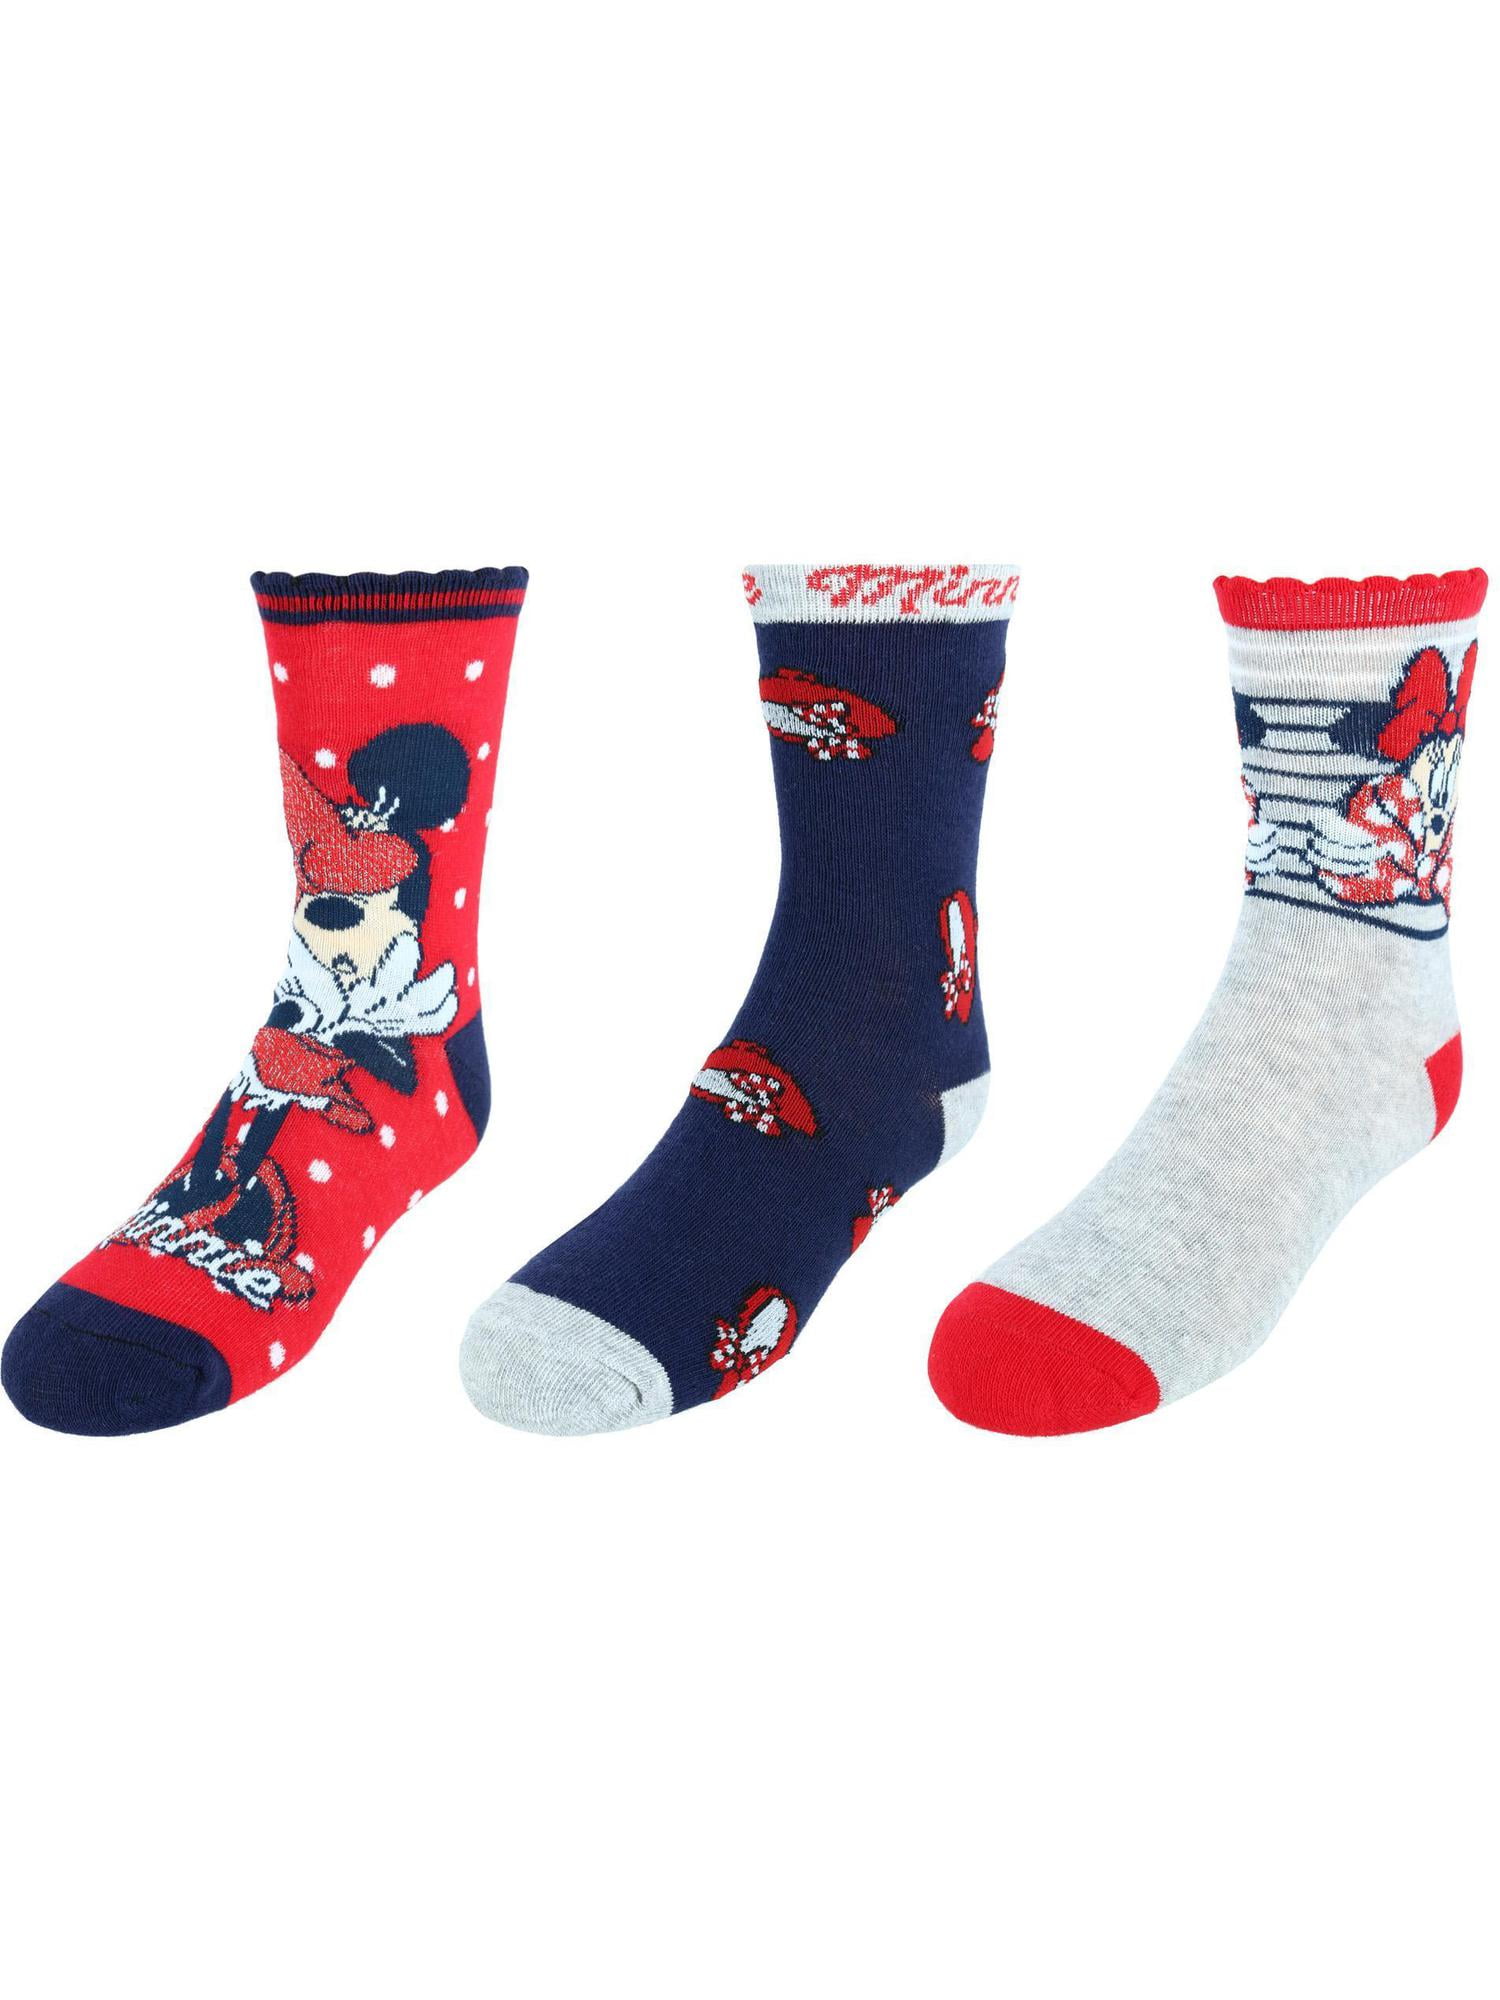 Minnie Mouse Girls Toddler 5 Pack Crew Socks 